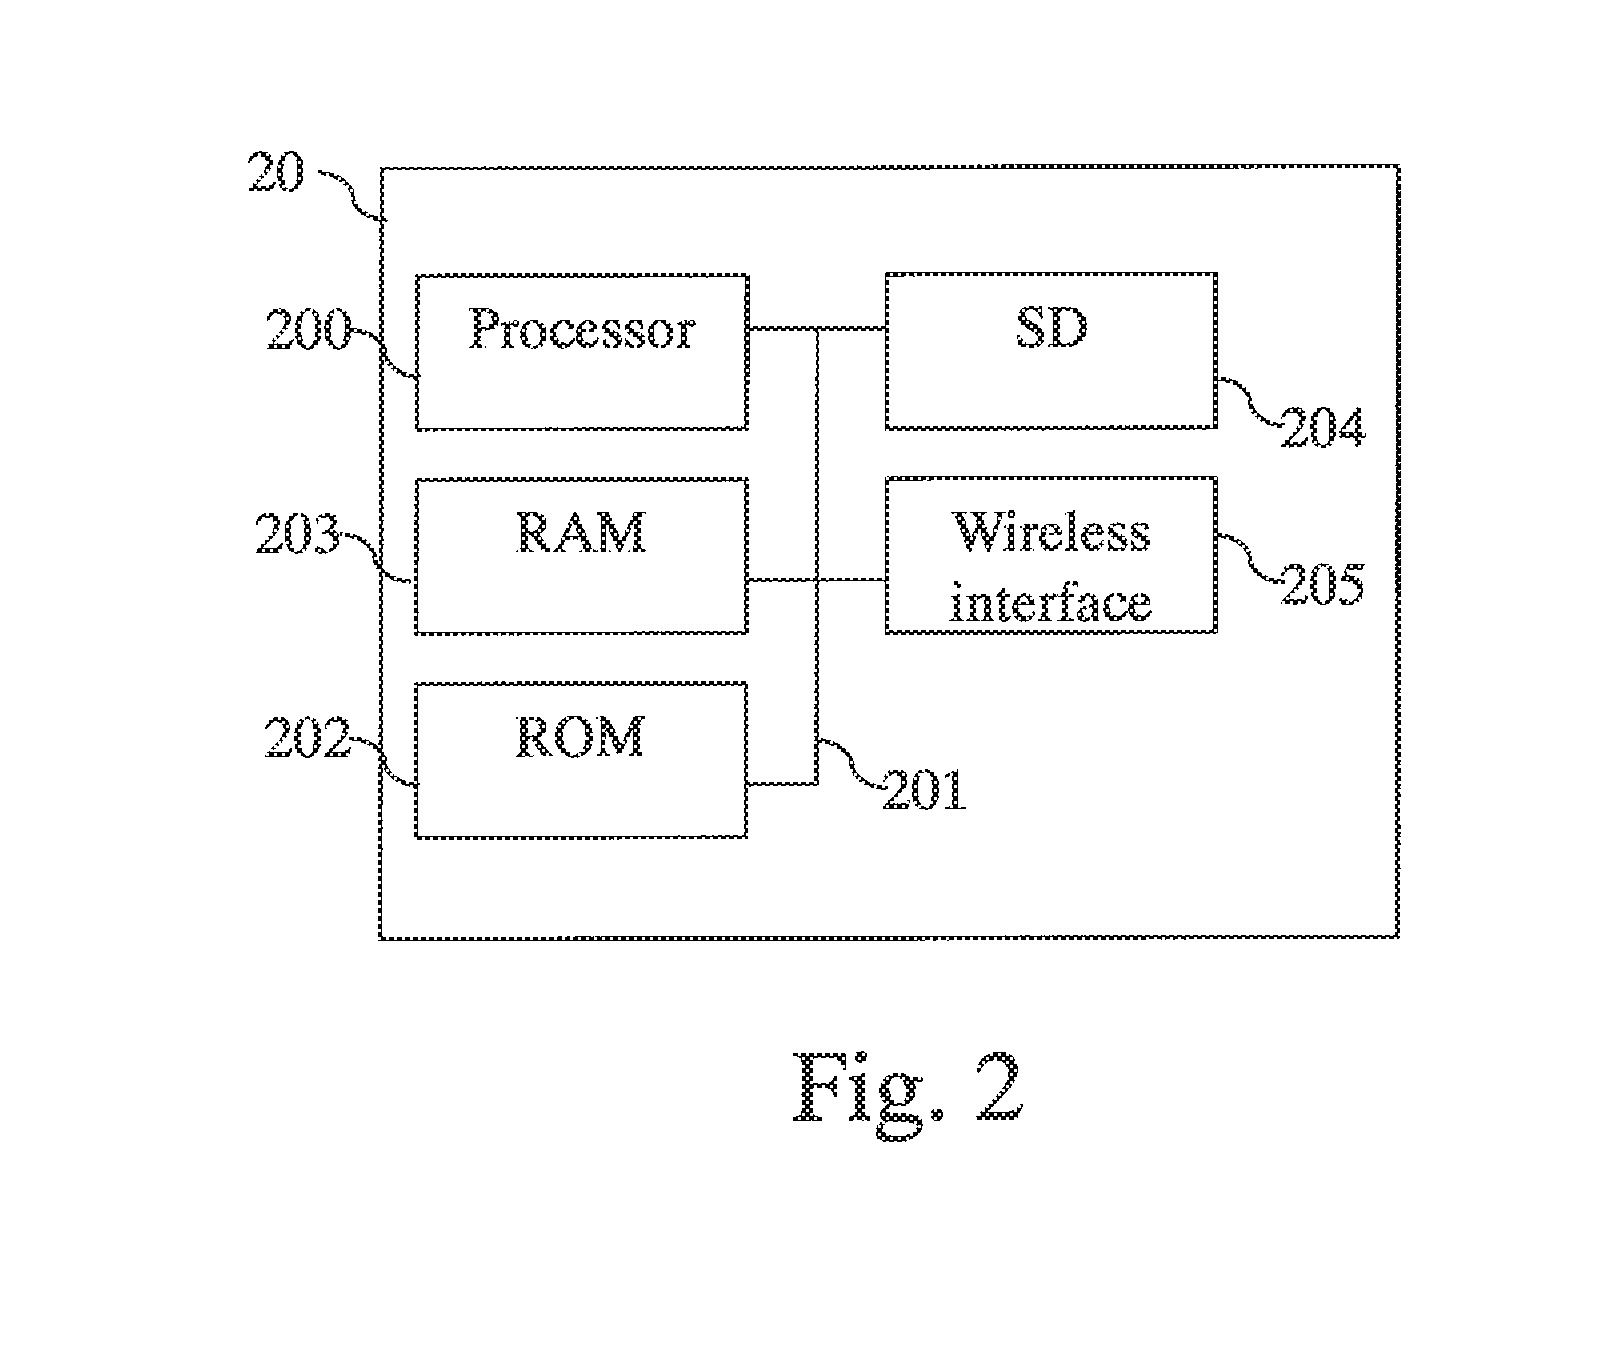 Transmitter harmonic cancellation for carrier aggregation/multiband operation